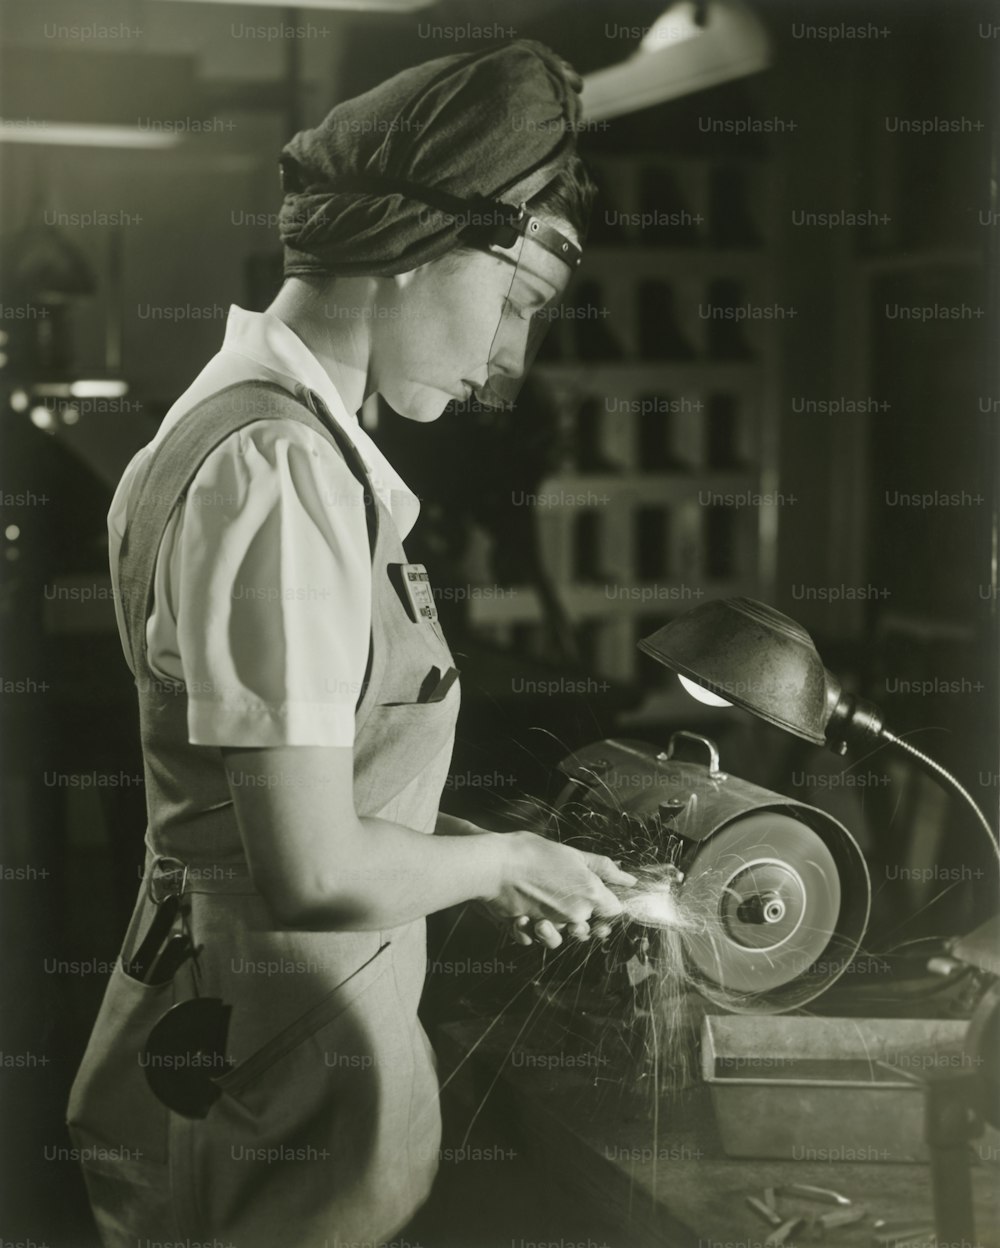 a woman working on a machine in a factory